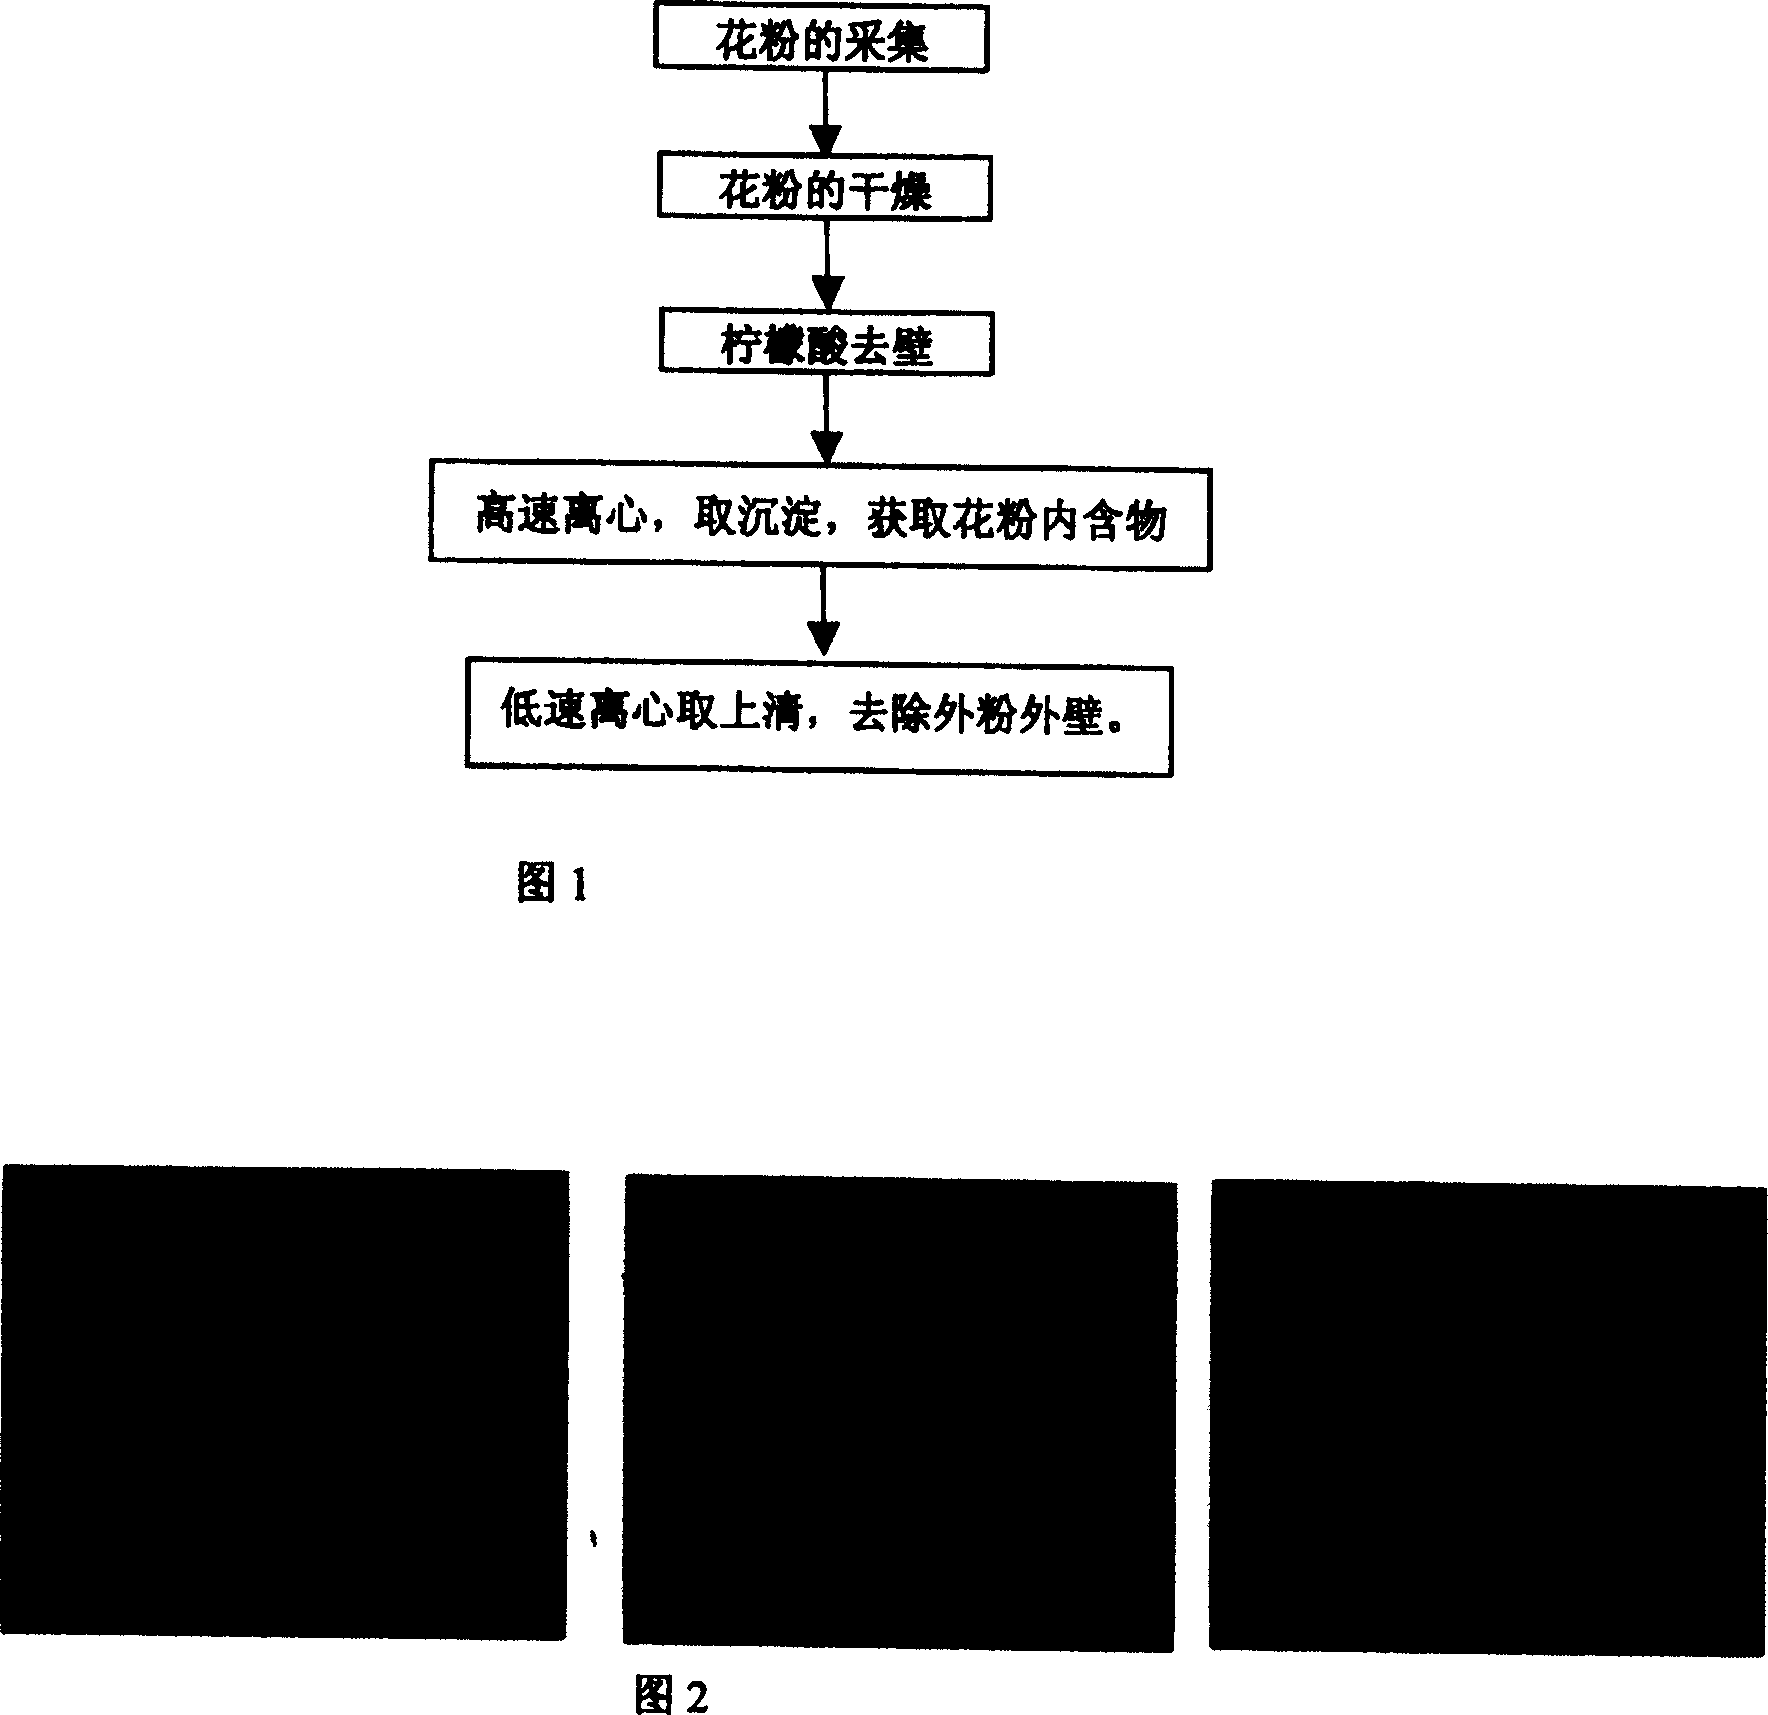 Method for extracting protoplast from pear flower powder by citric acid